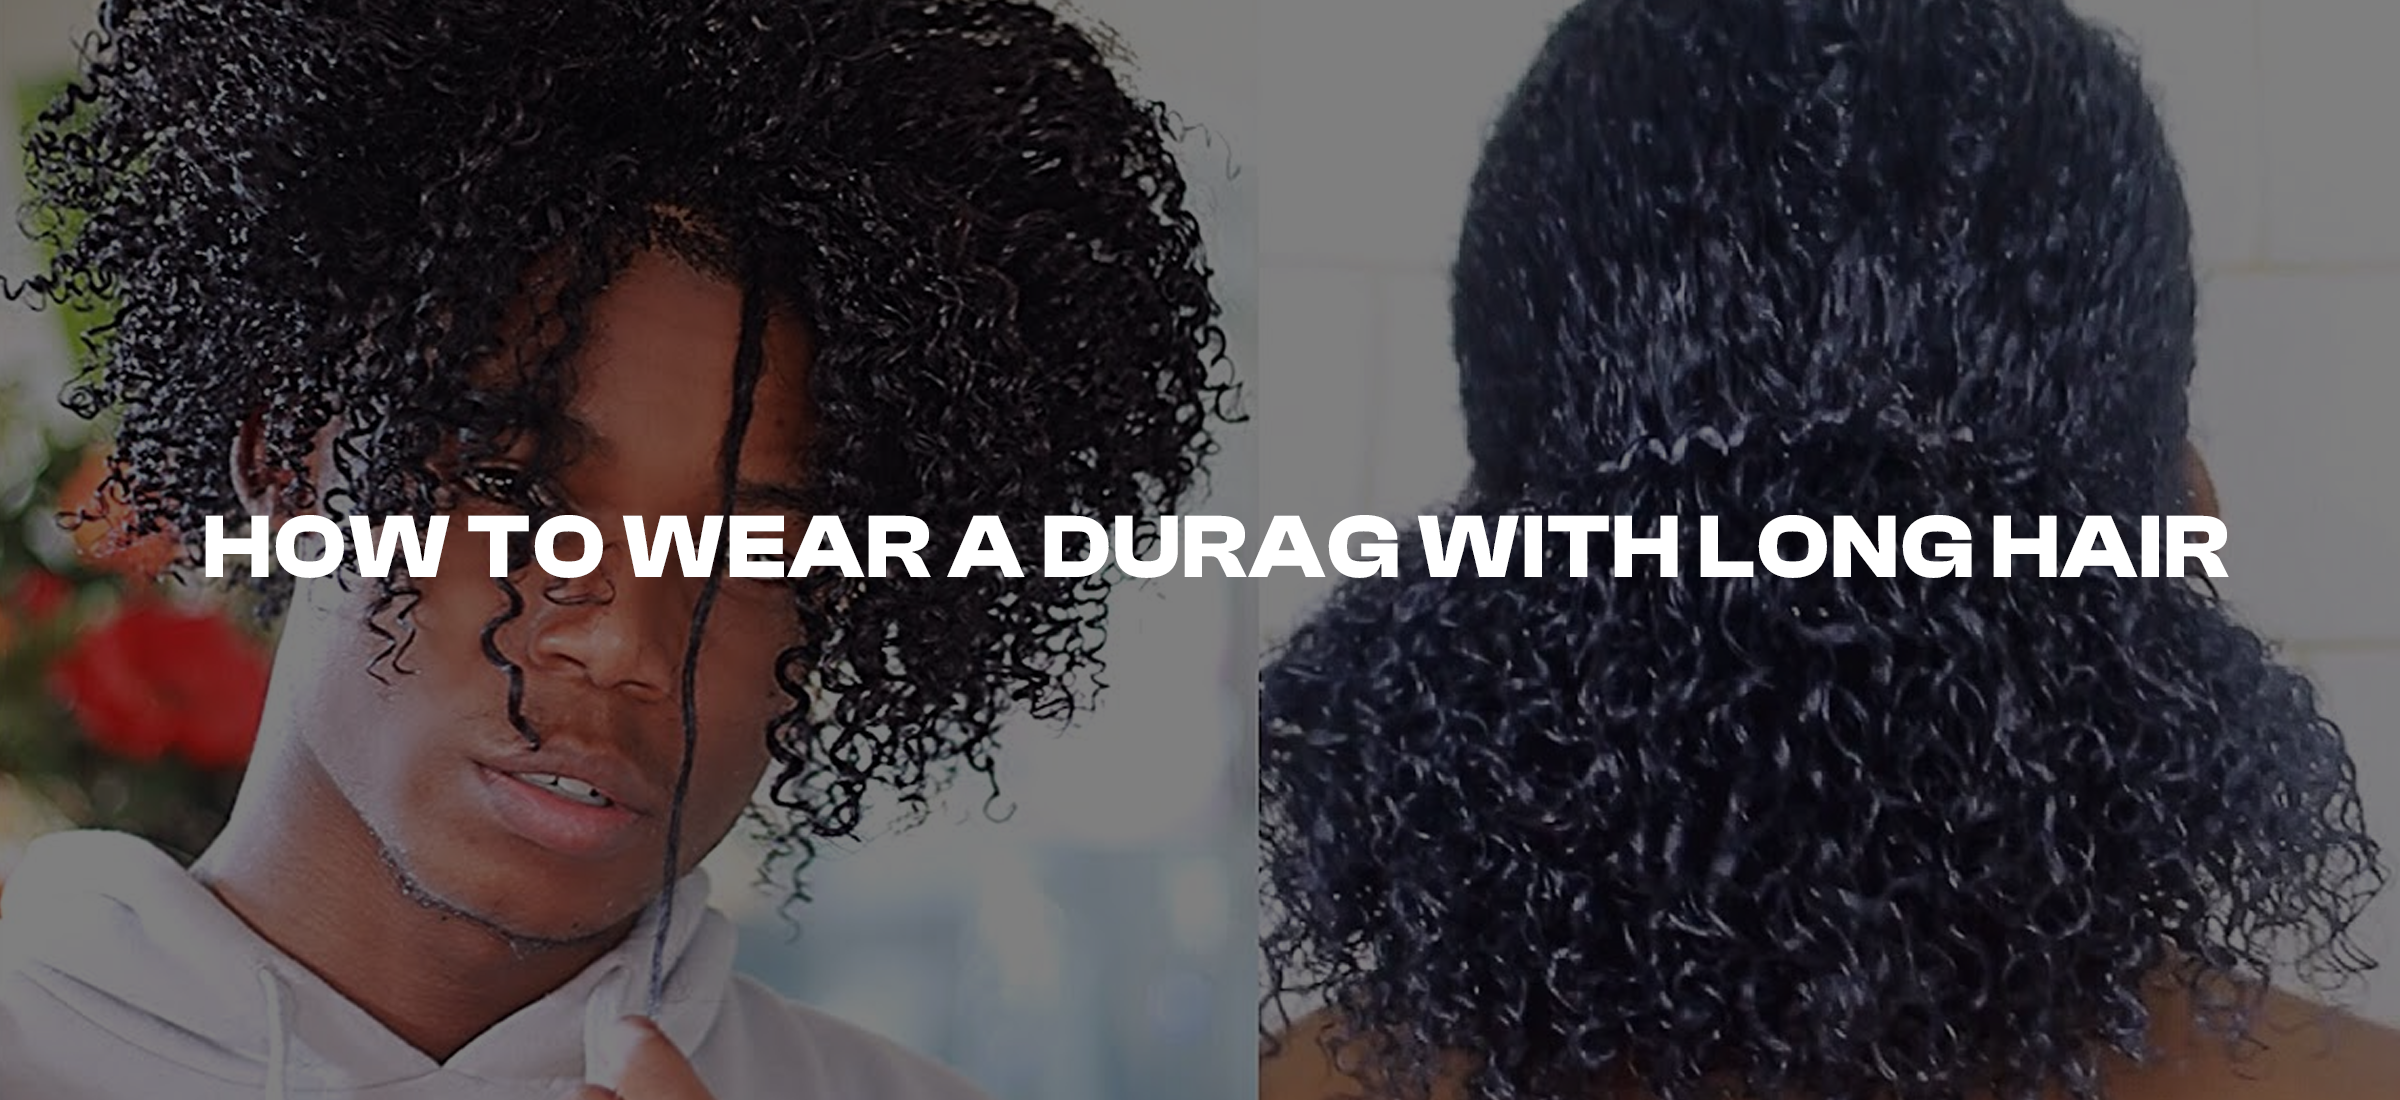 How to Wear a Durag with Long Hair: Tips and Tricks